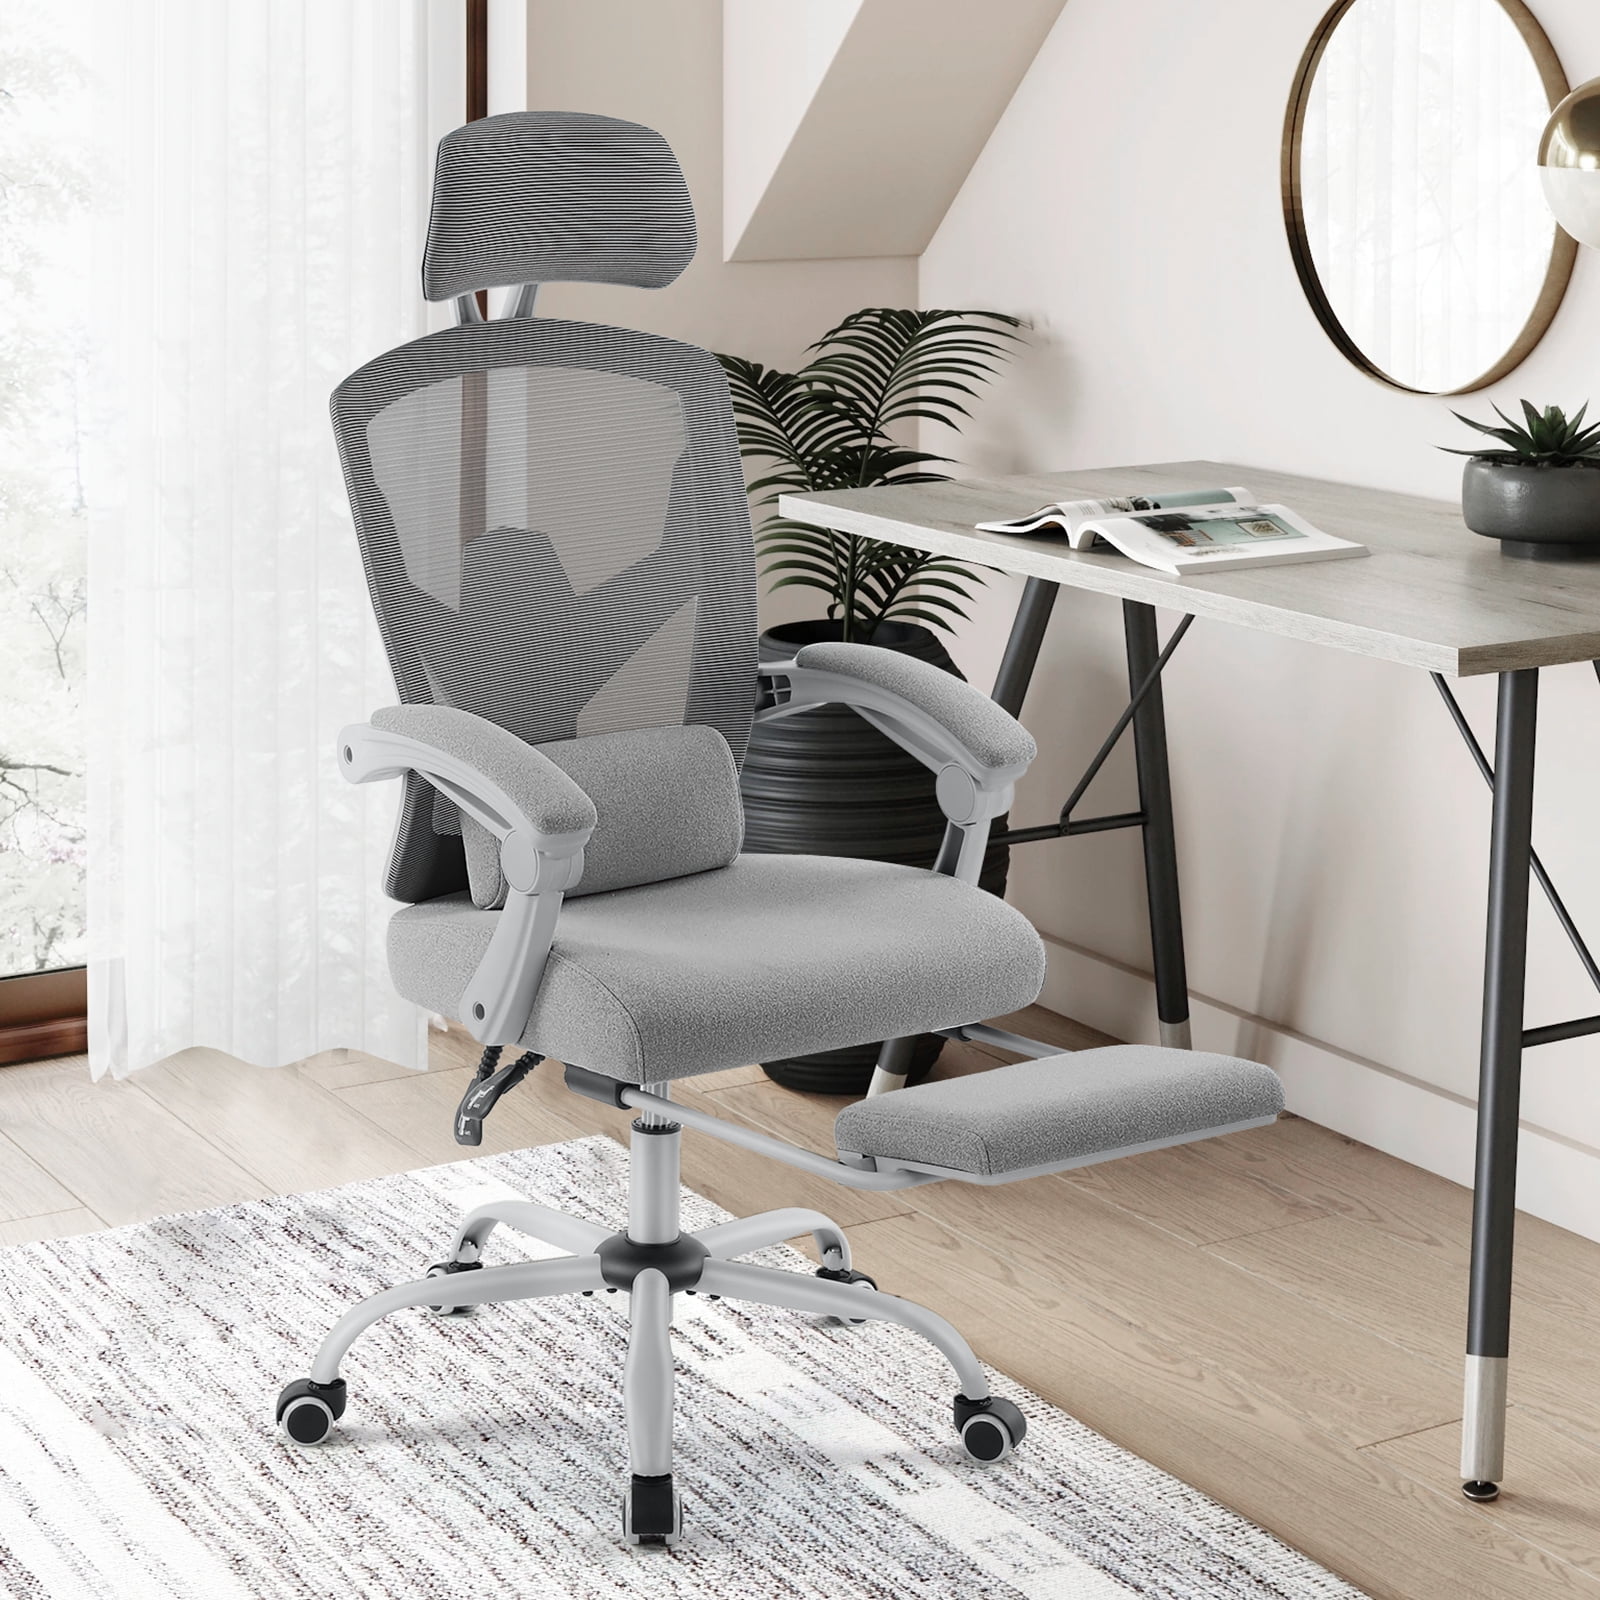 Swivel Chairs With Footrest Leg Rest Comfortable Mesh Ergonomic Office Chair